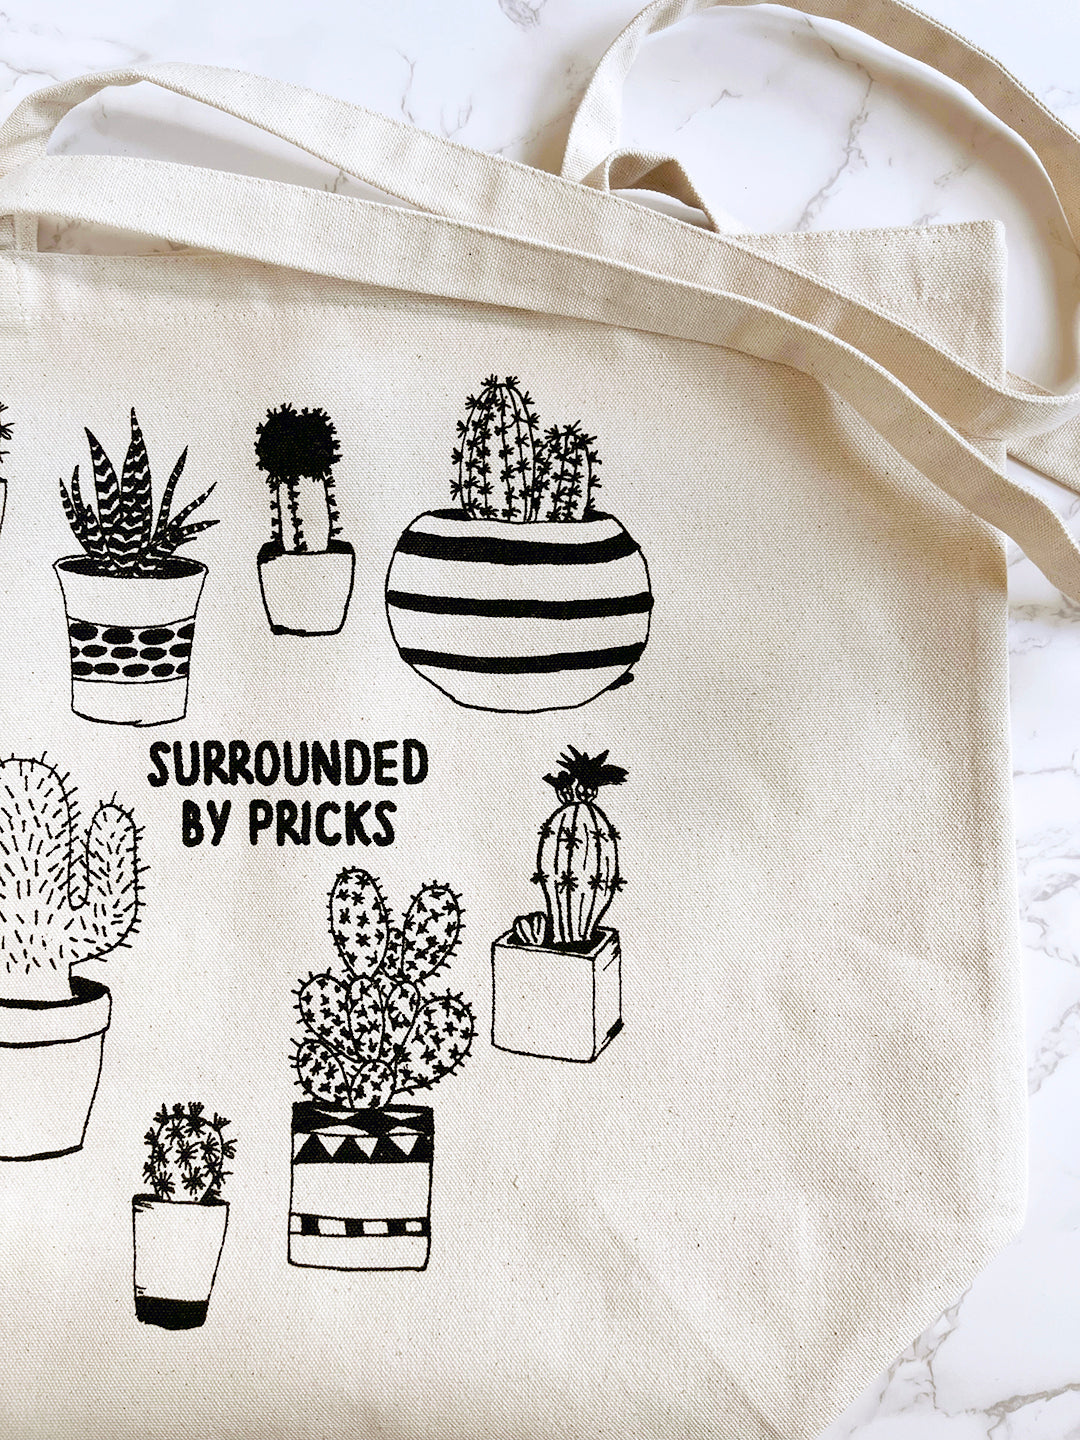 Surrounded by Pricks Farmers Market Tote